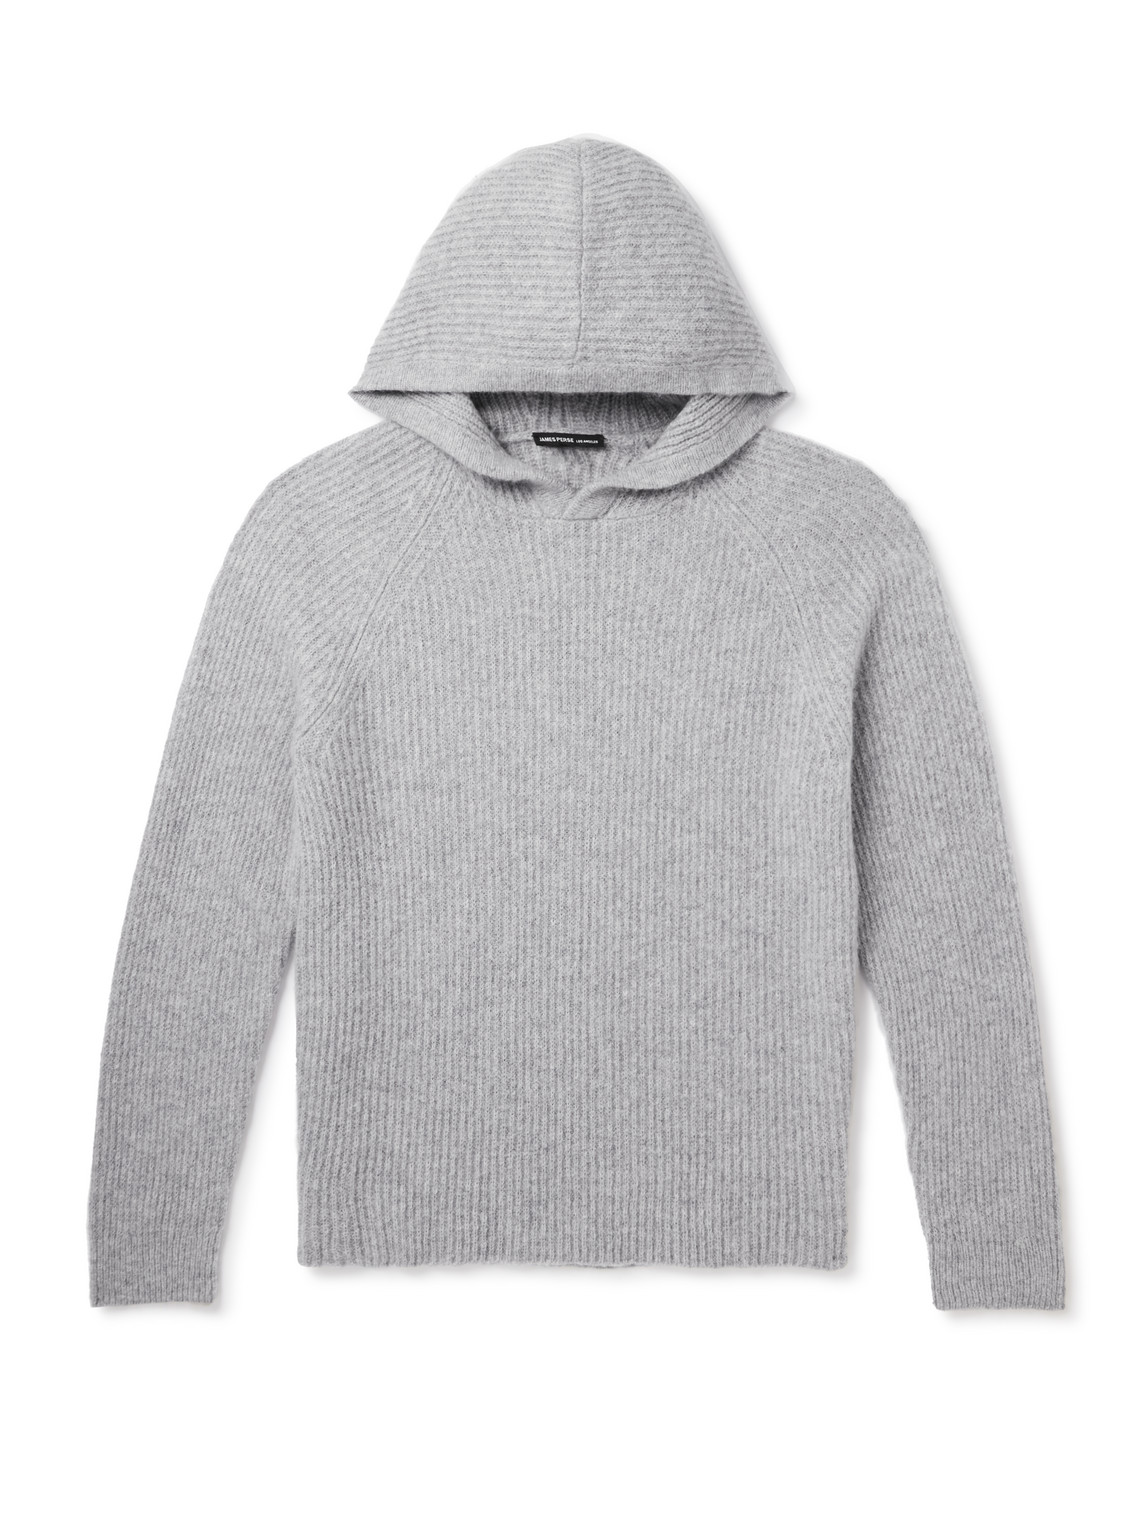 James Perse Ribbed Cashmere Hoodie In Gray